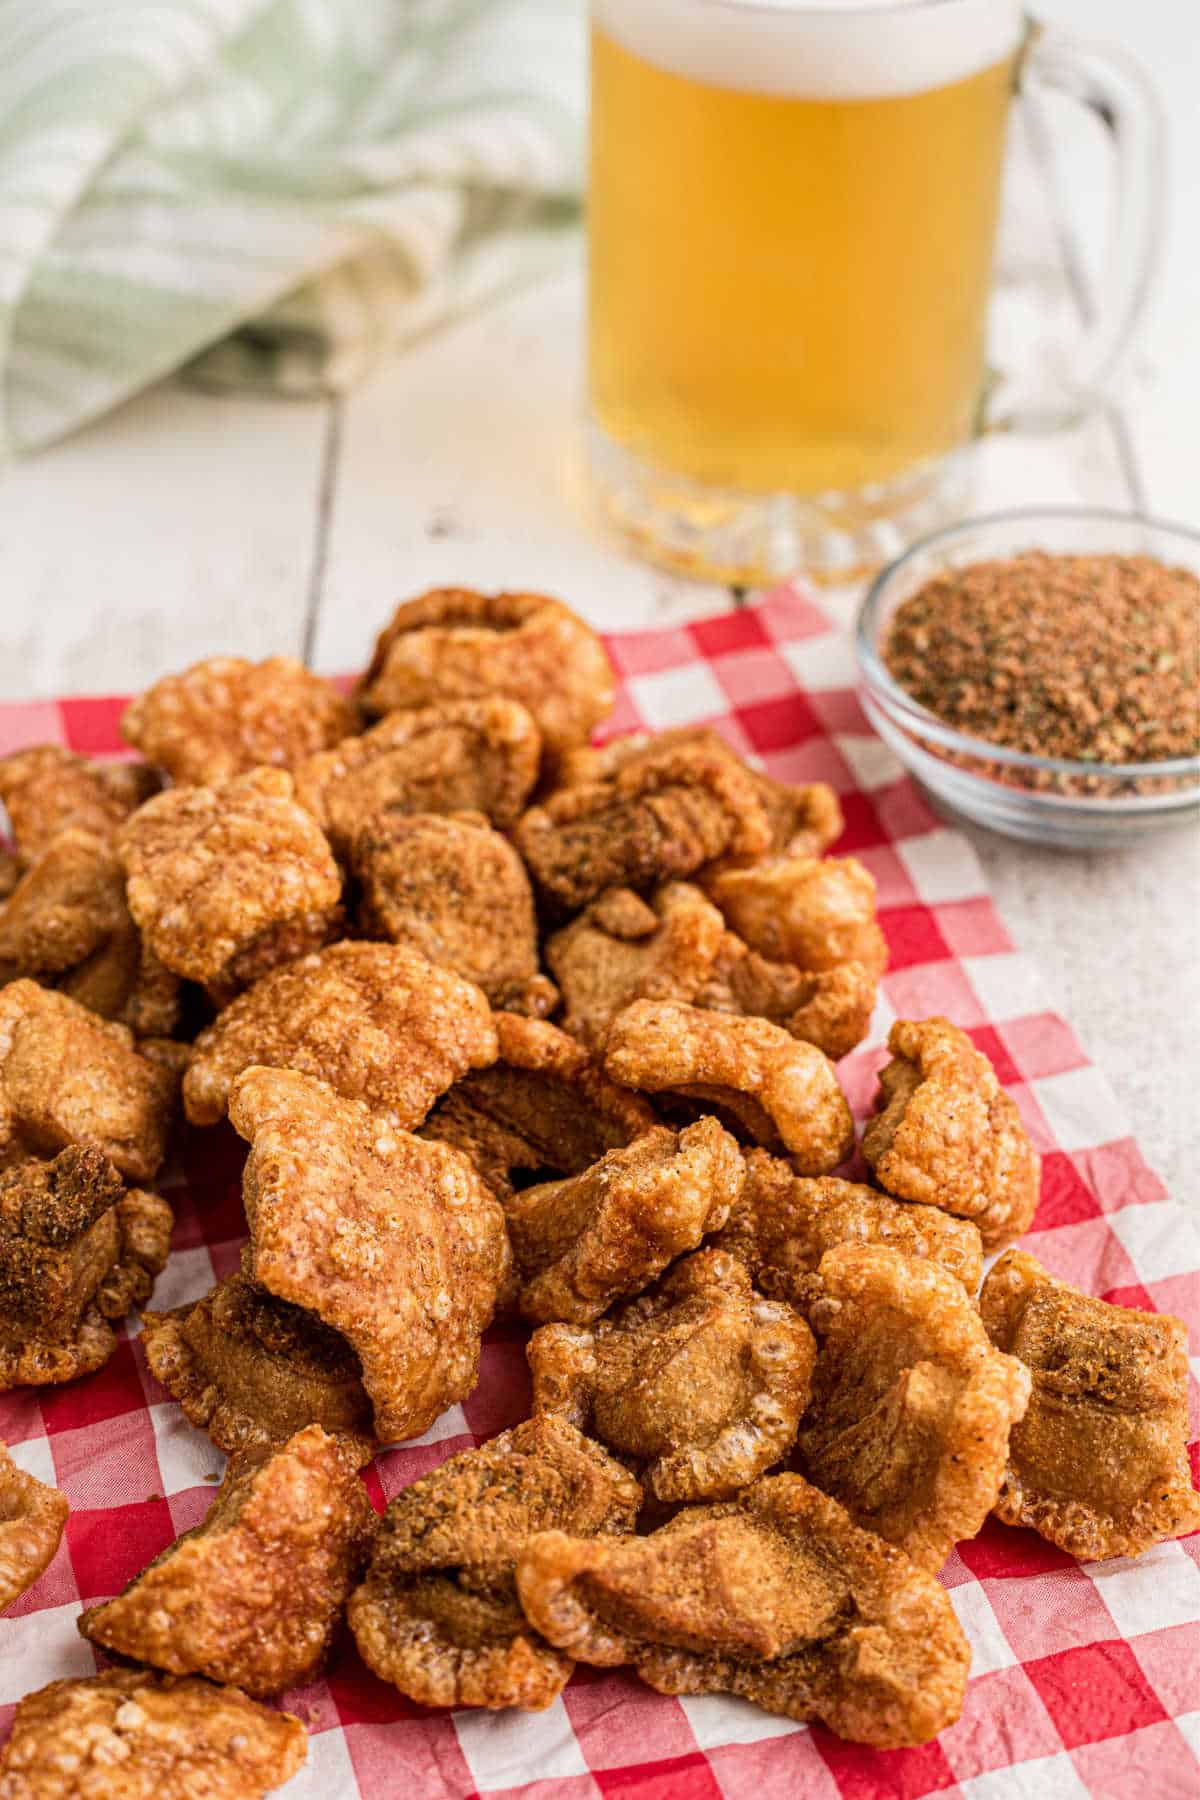 A pile of pork cracklins on a red napkin in front of a large beer.